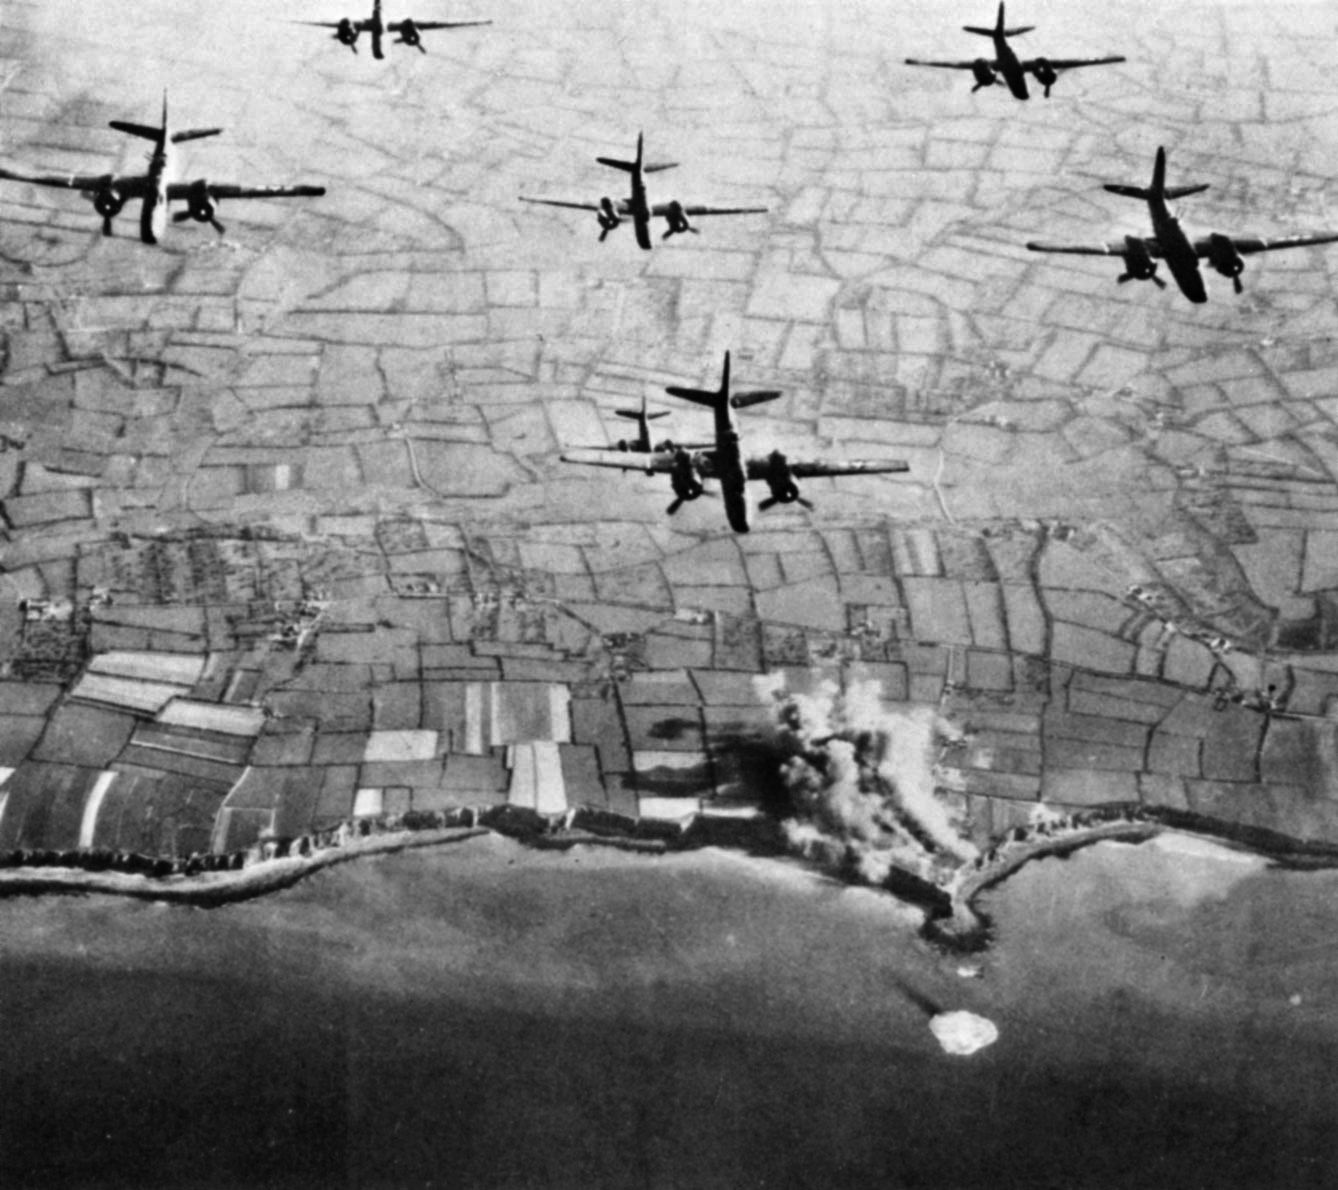 Allied medium bombers of the 9th Air Force execute a tactical air strike against German gun emplacements at Pointe du Hoc on June 4, 1944.